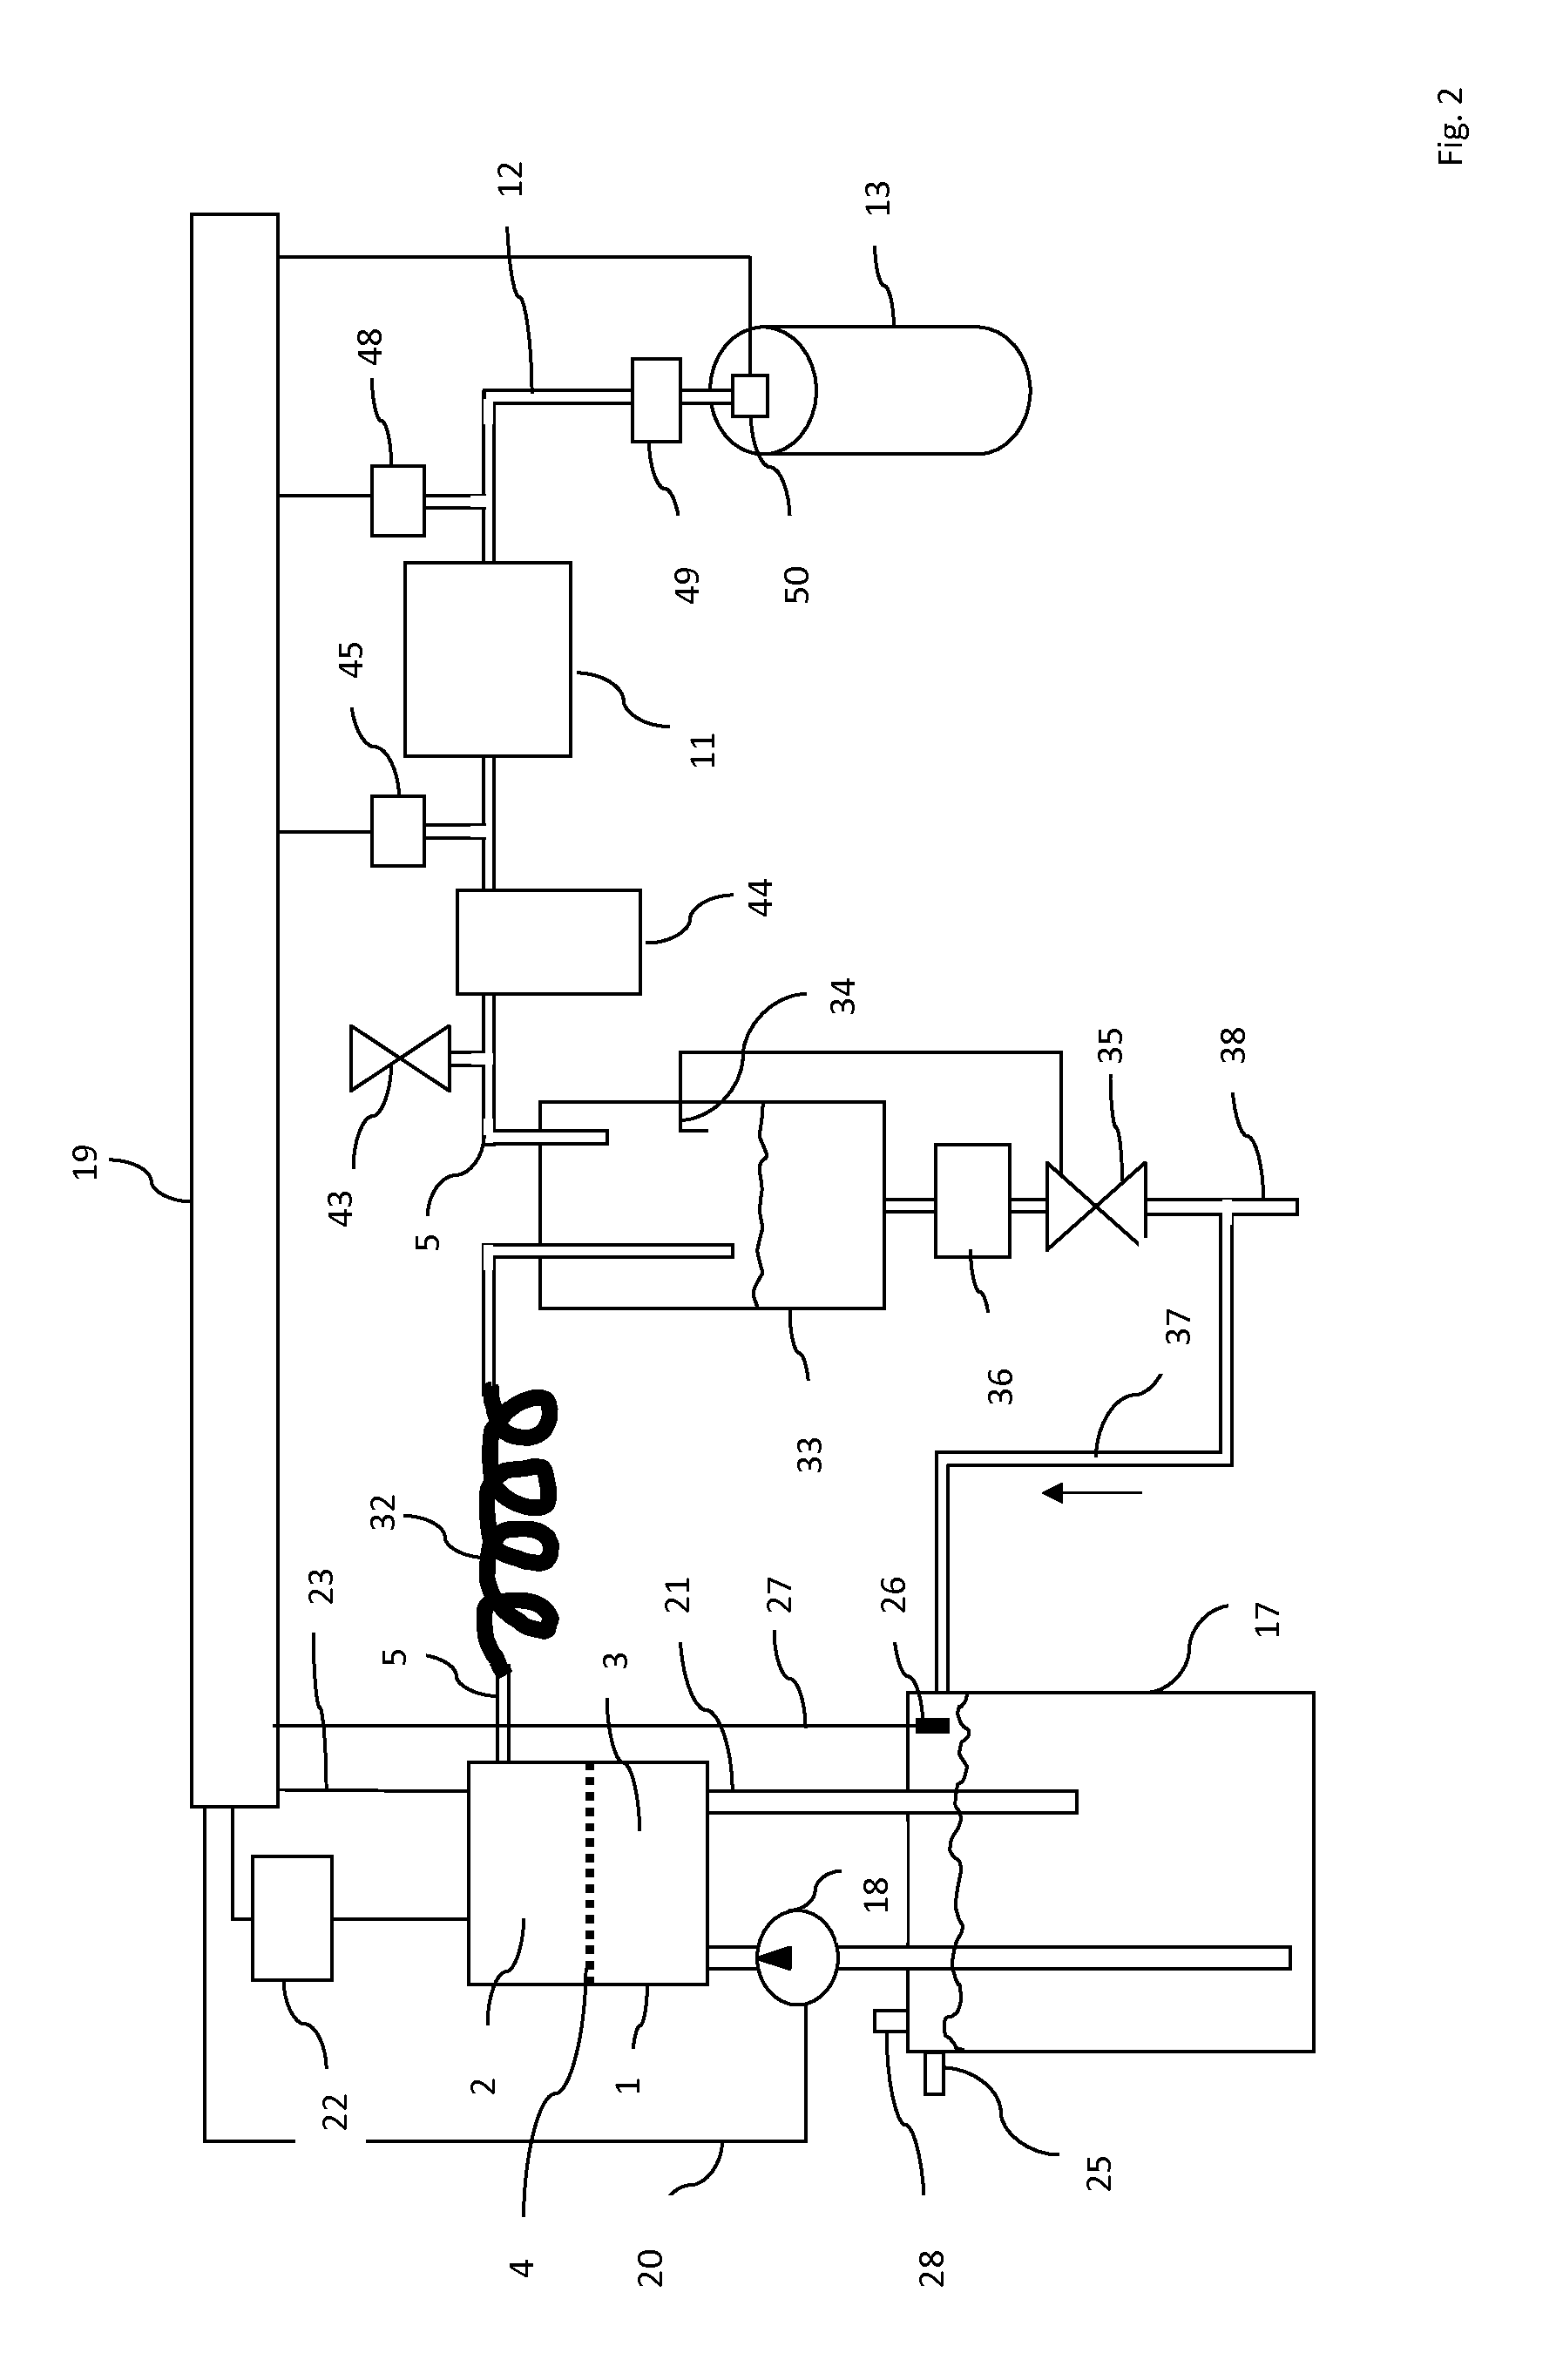 Method and Device for Generating and Storing Hydrogen